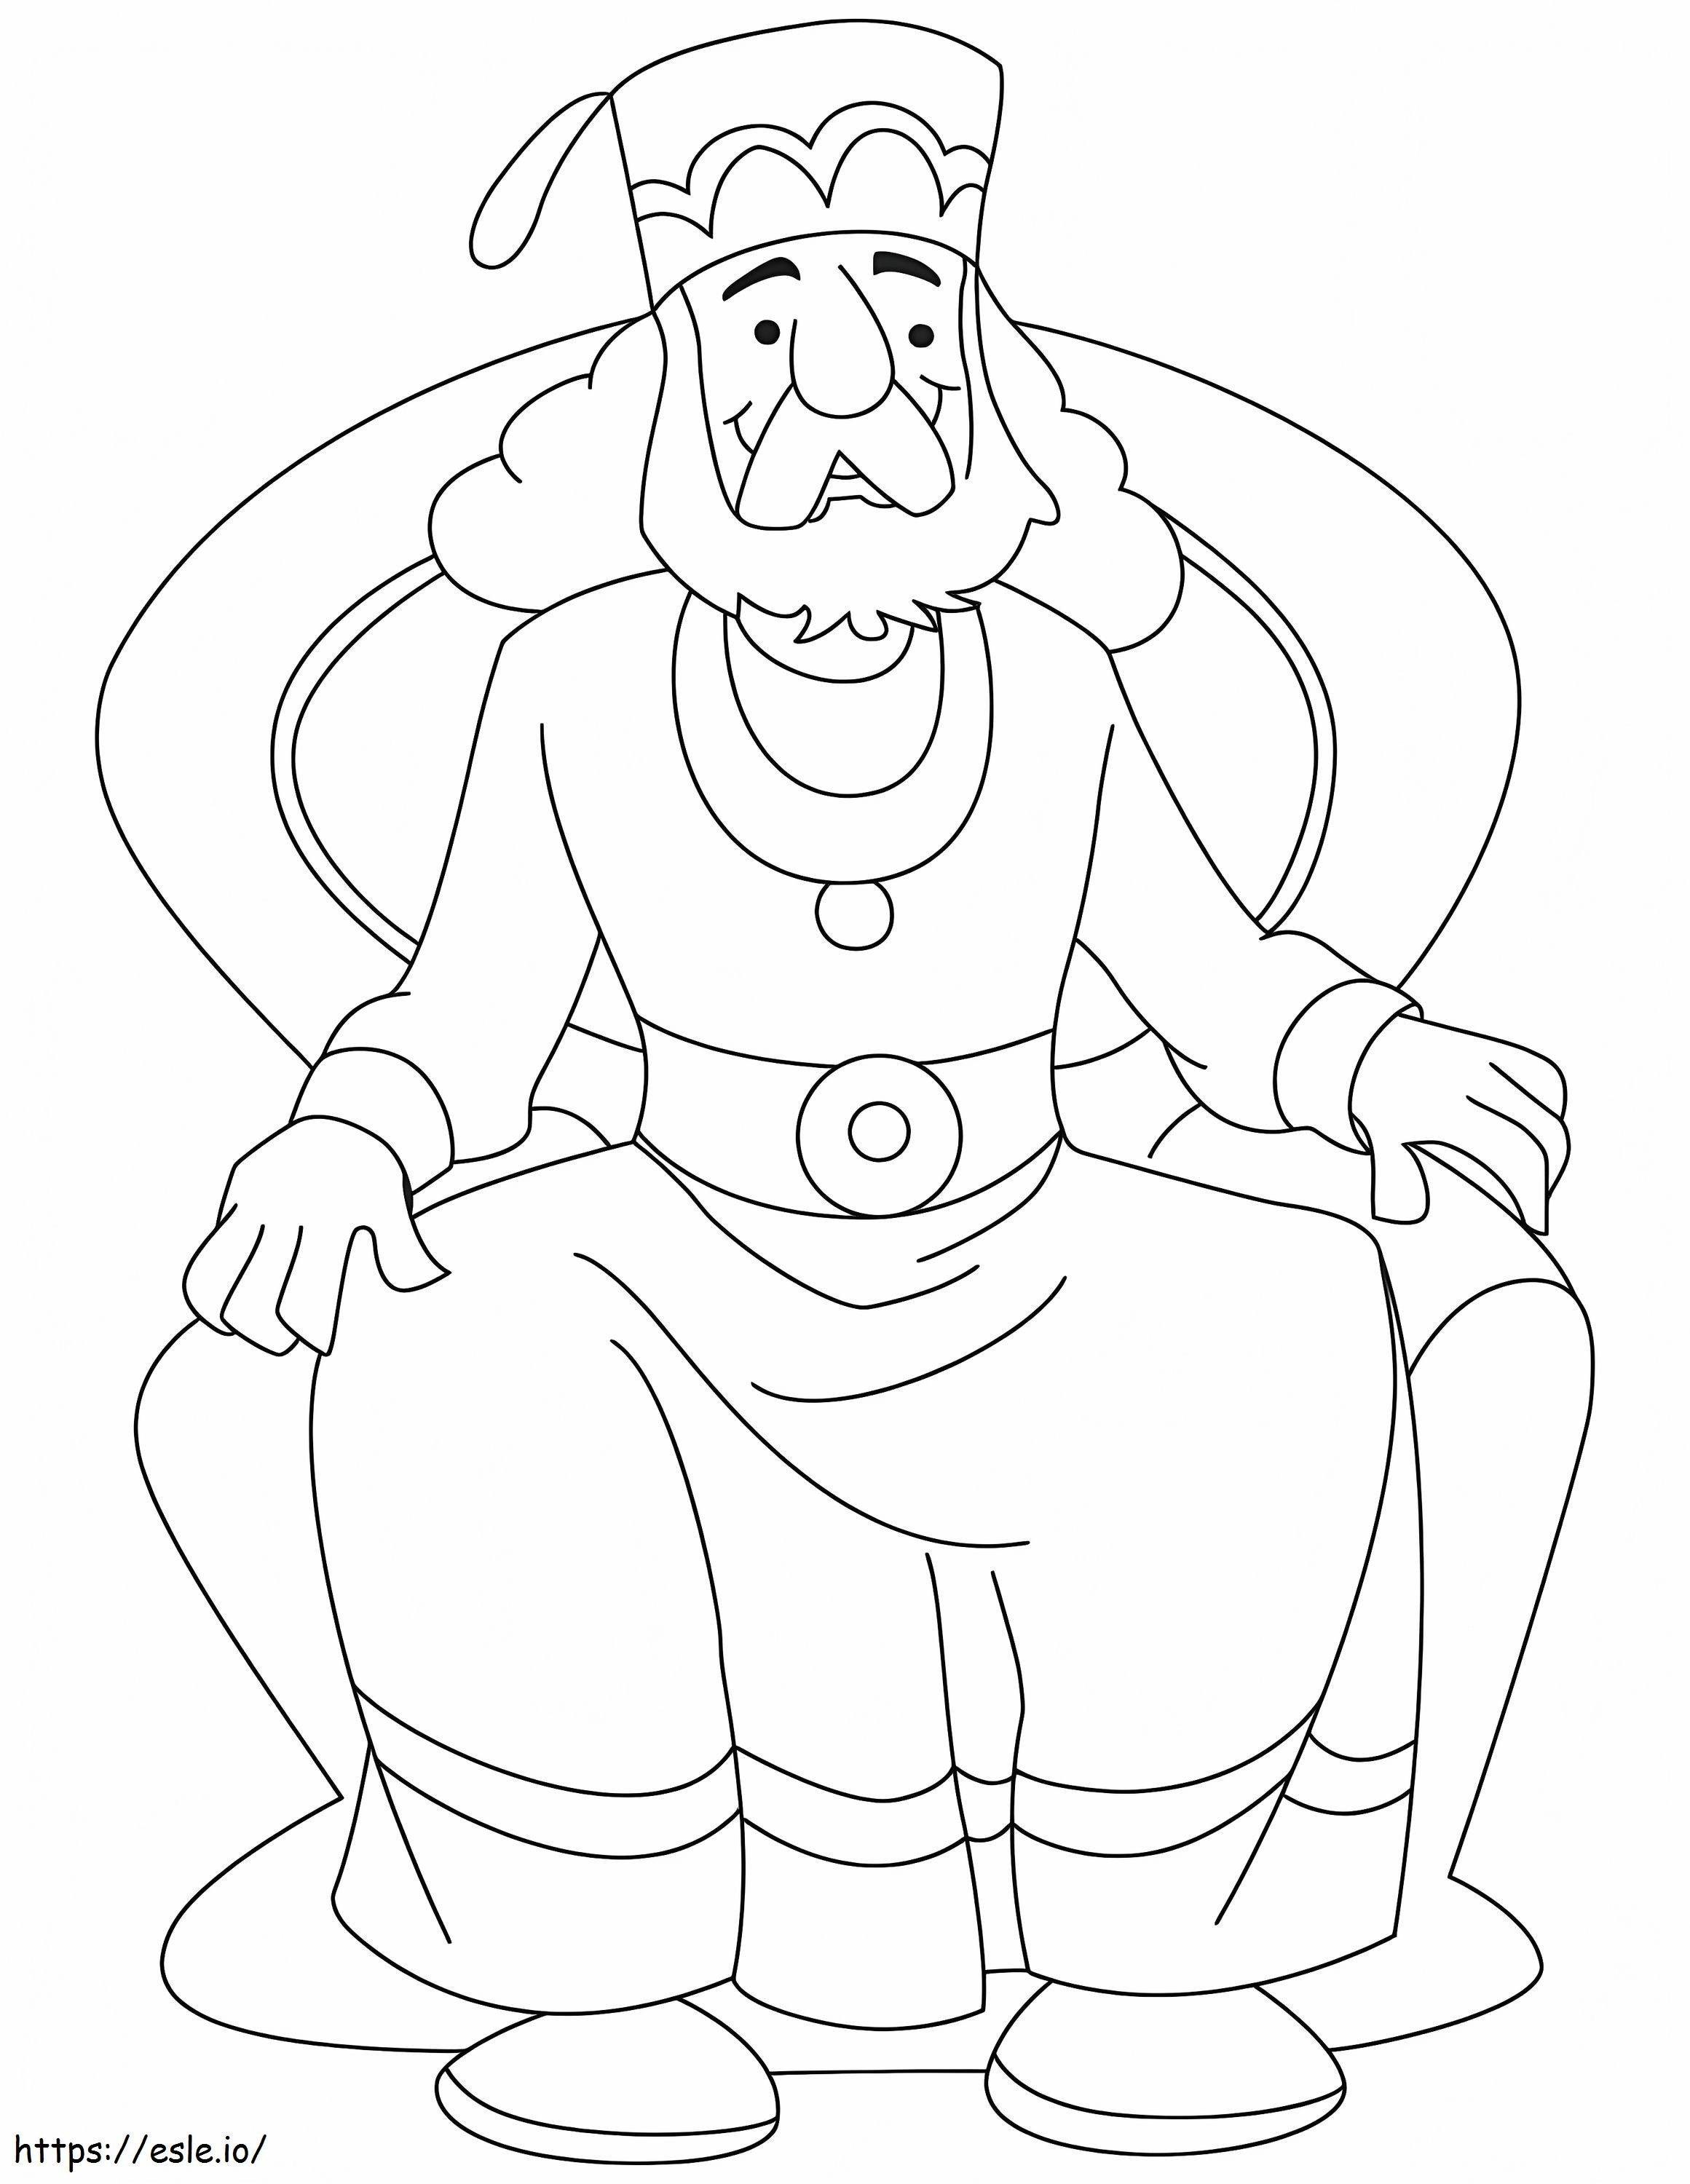 King On Chair coloring page